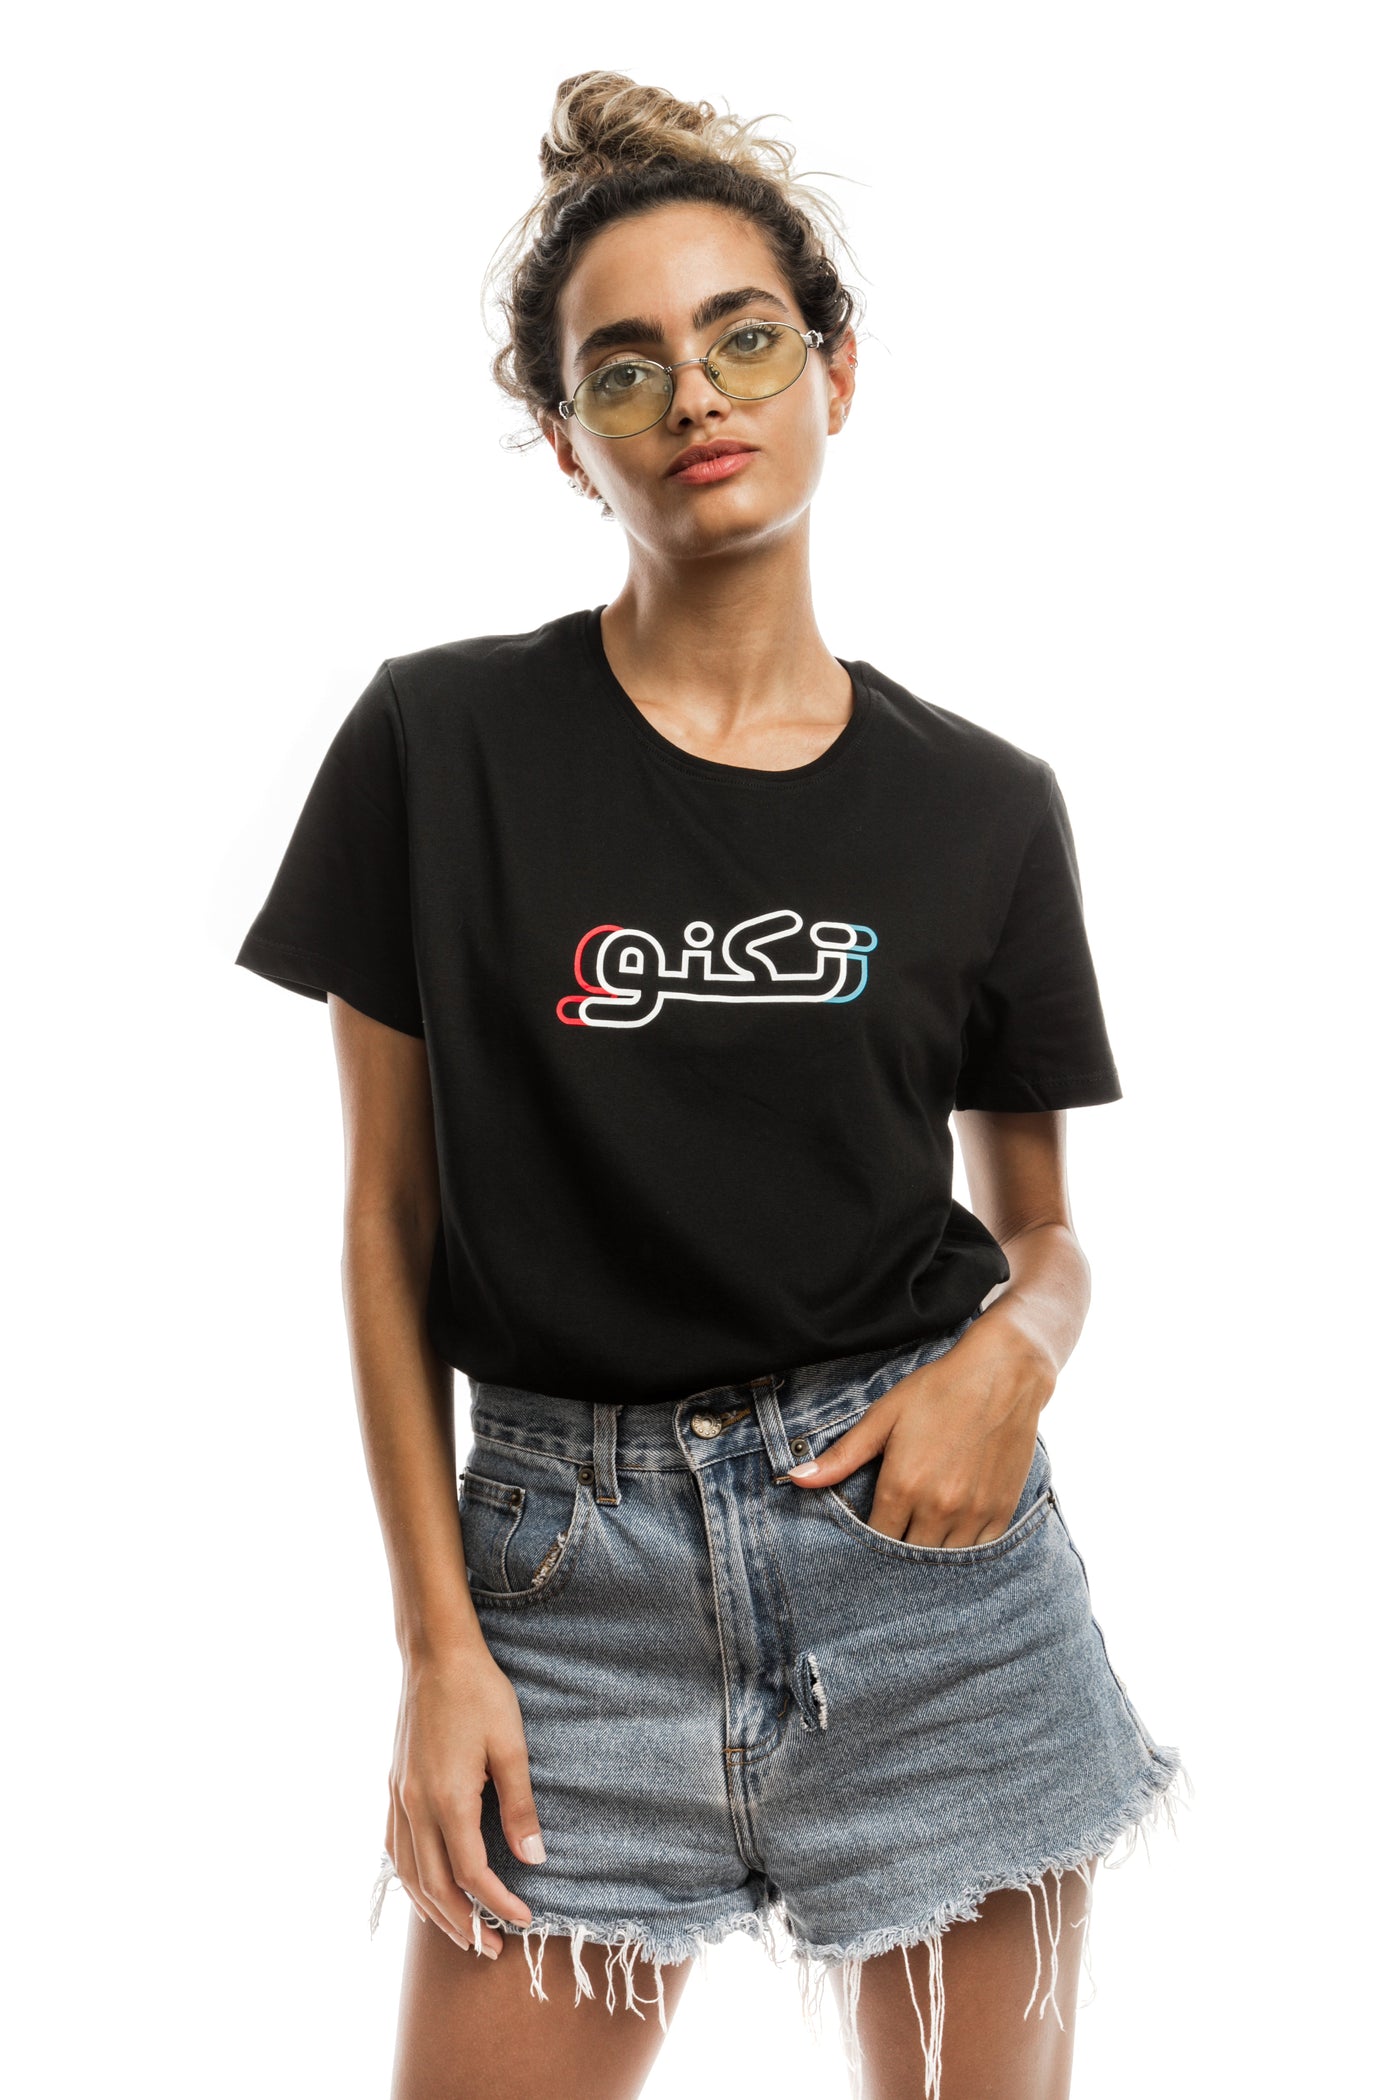 young adult female wearing black t-shirt with techno written in arabic تكنو and in blue, red and white in the center of the t-shirt along with blue jeans shorts and glasses